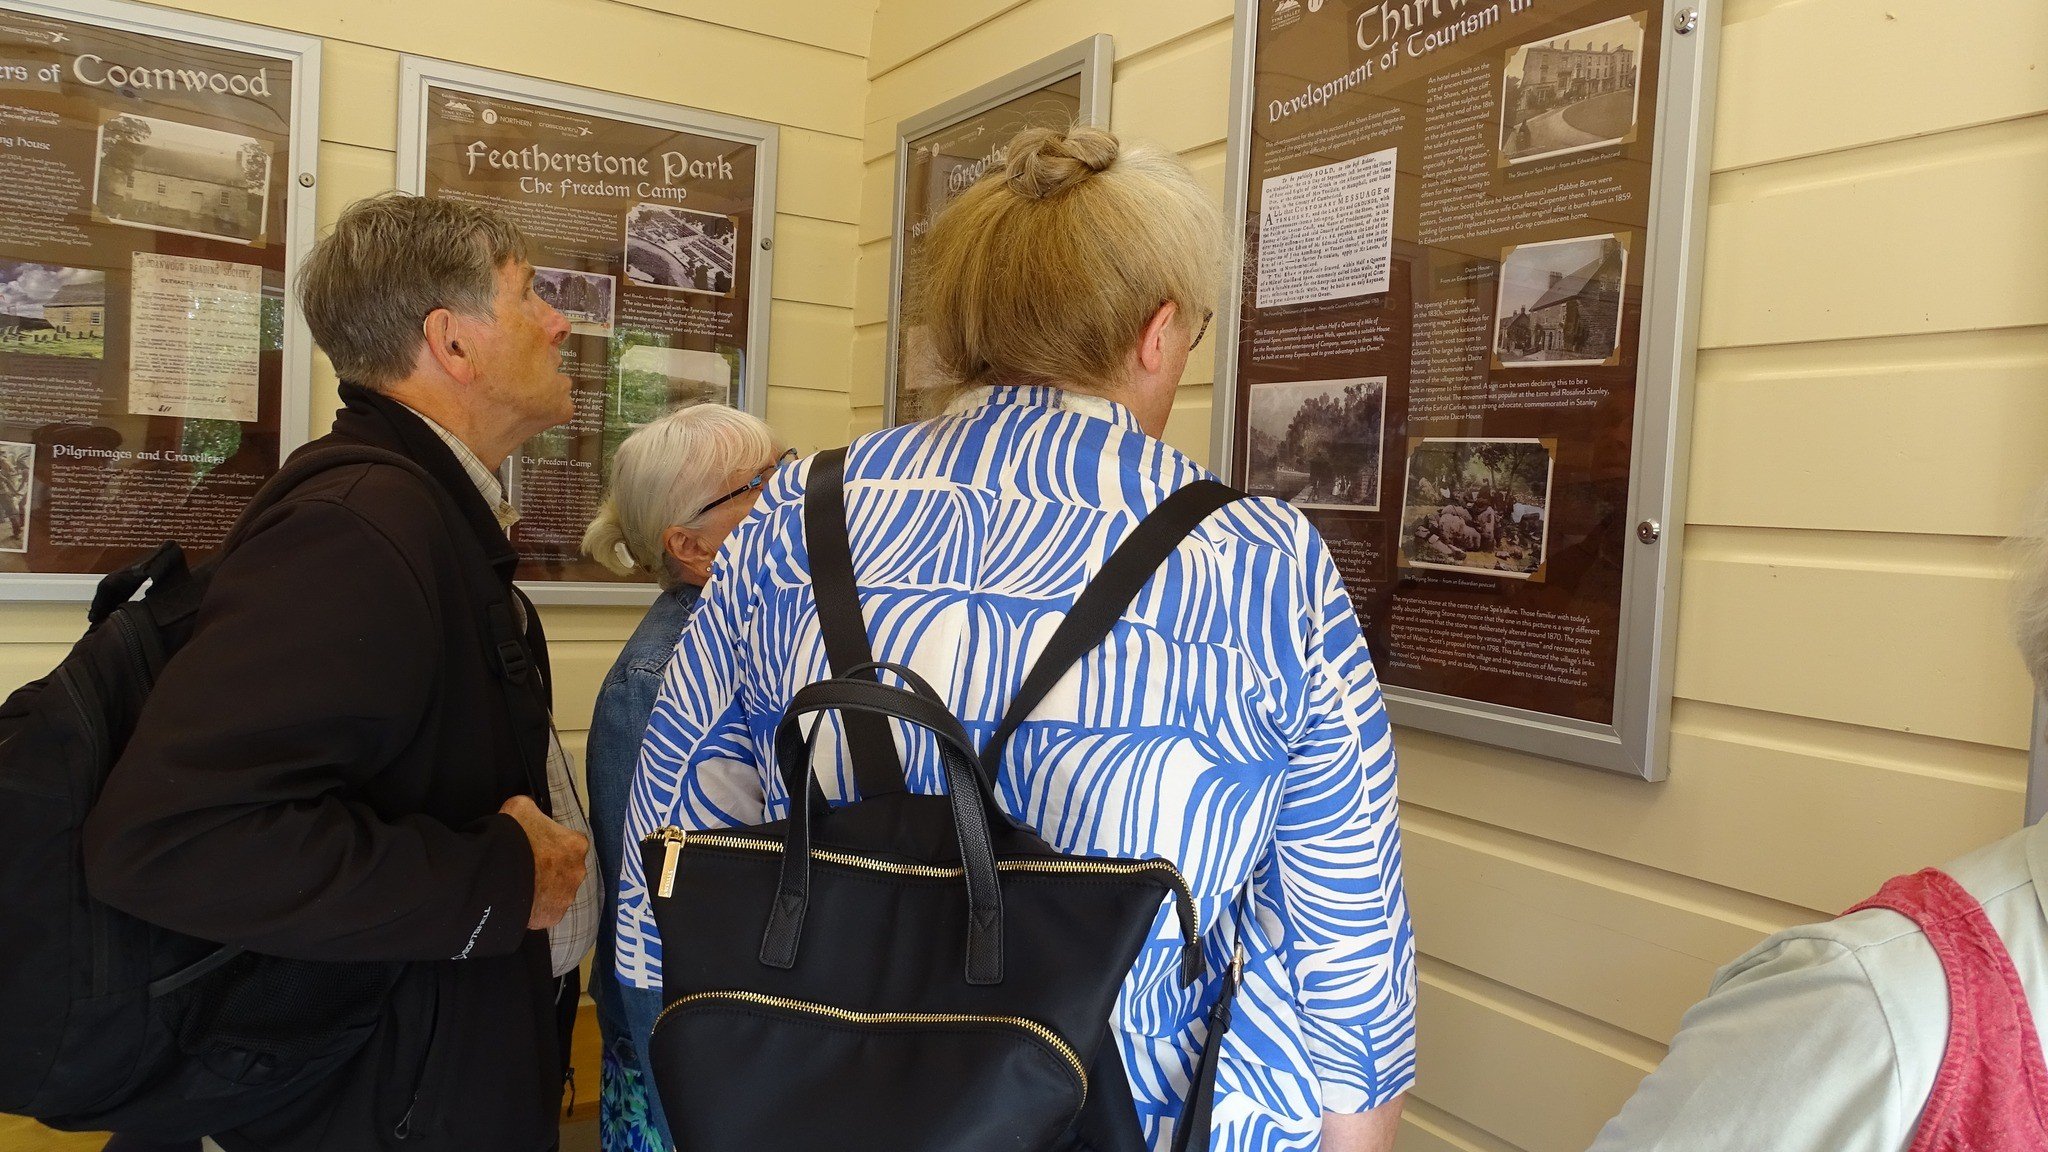 This image shows community members enjoying the new exhibition at Haltwhistle-2